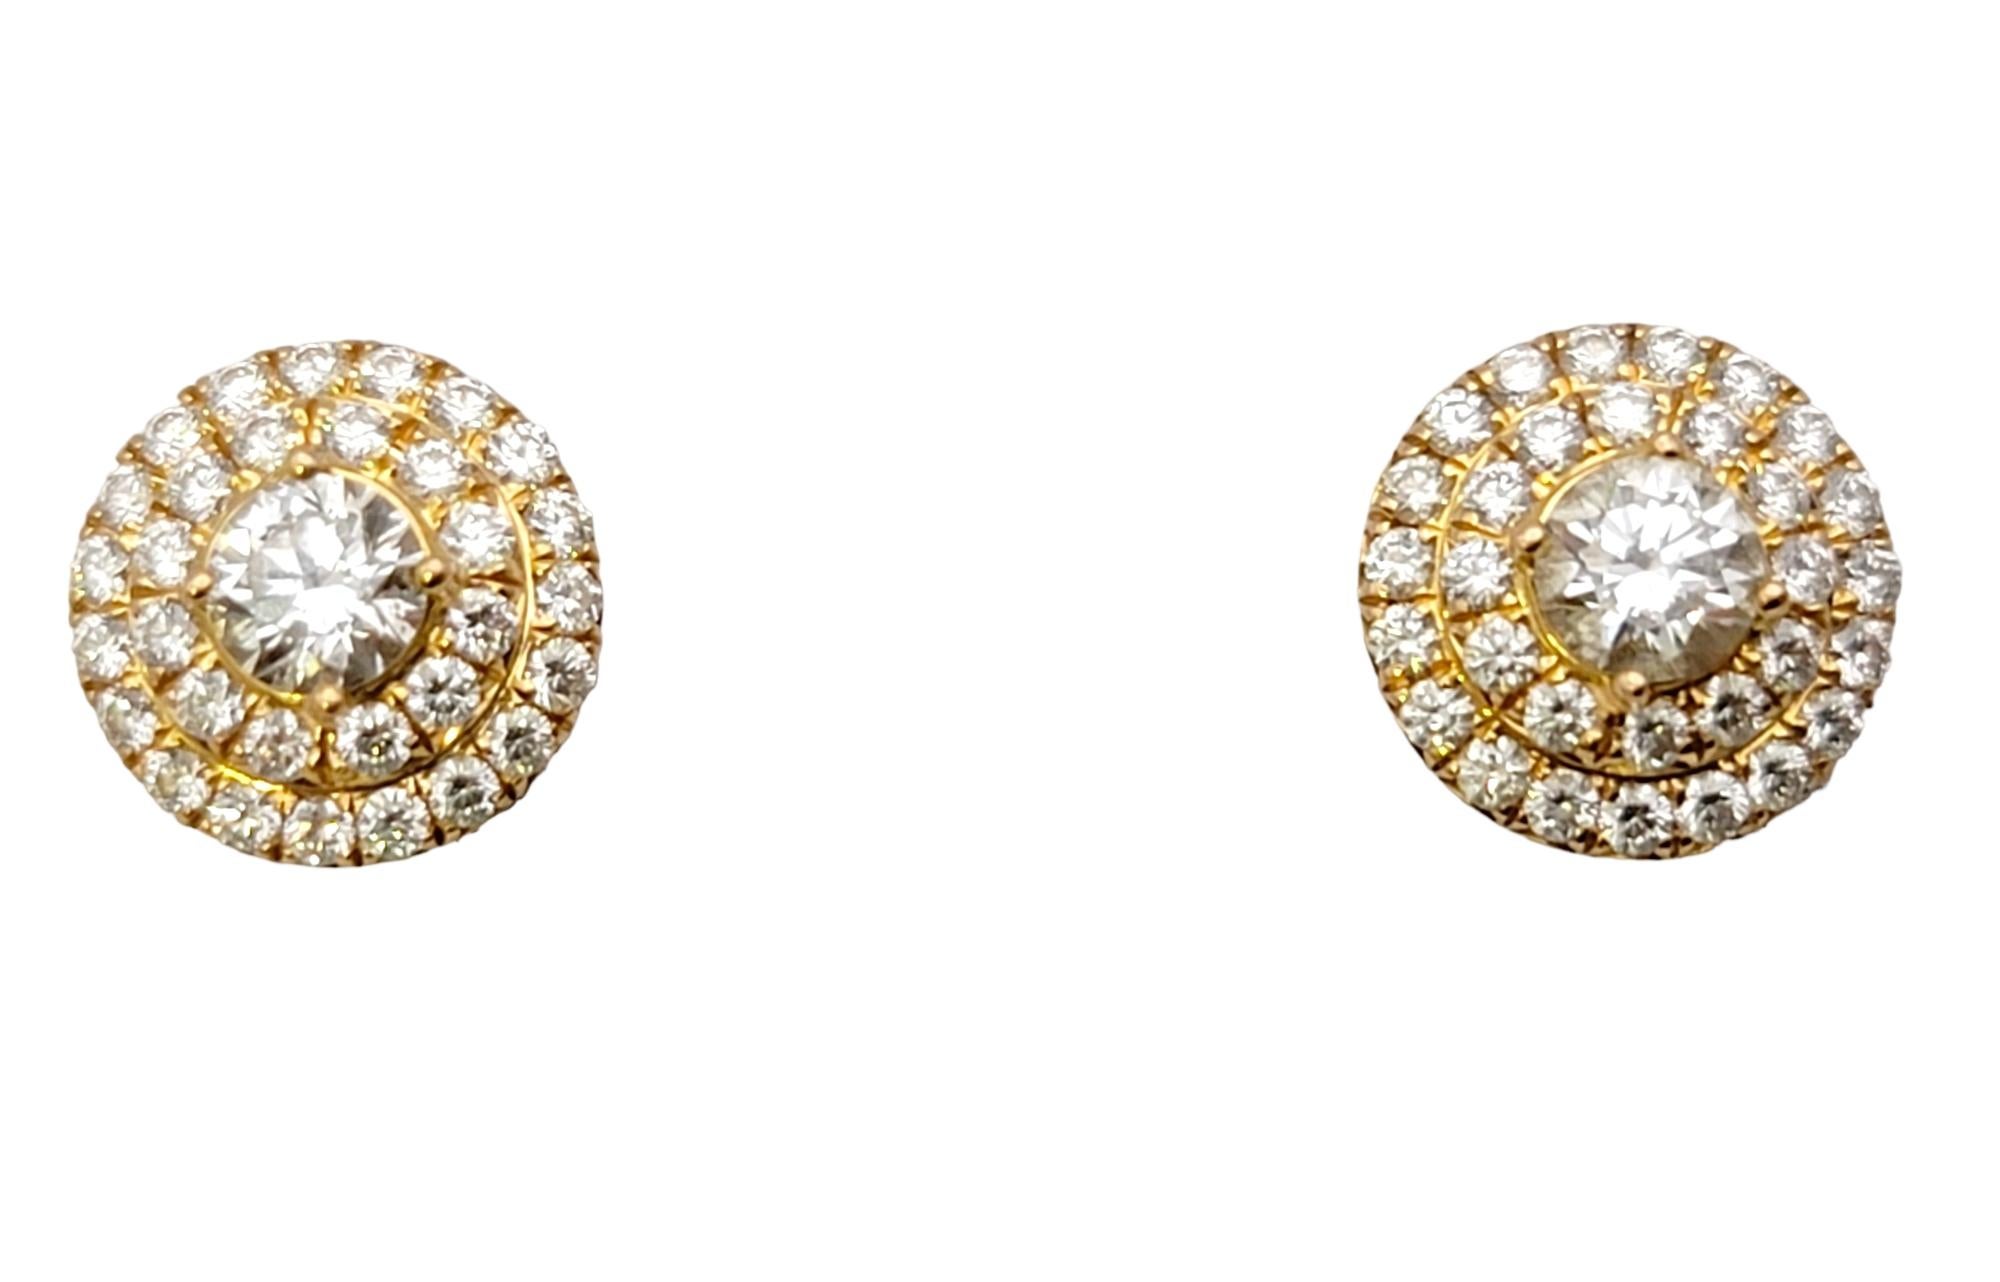 Absolutely gorgeous Soleste diamond stud earrings from Tiffany & Co.. Founded in 1837 in New York City, Tiffany & Co. is one of the world's most storied luxury design houses recognized globally for its innovative jewelry design, extraordinary